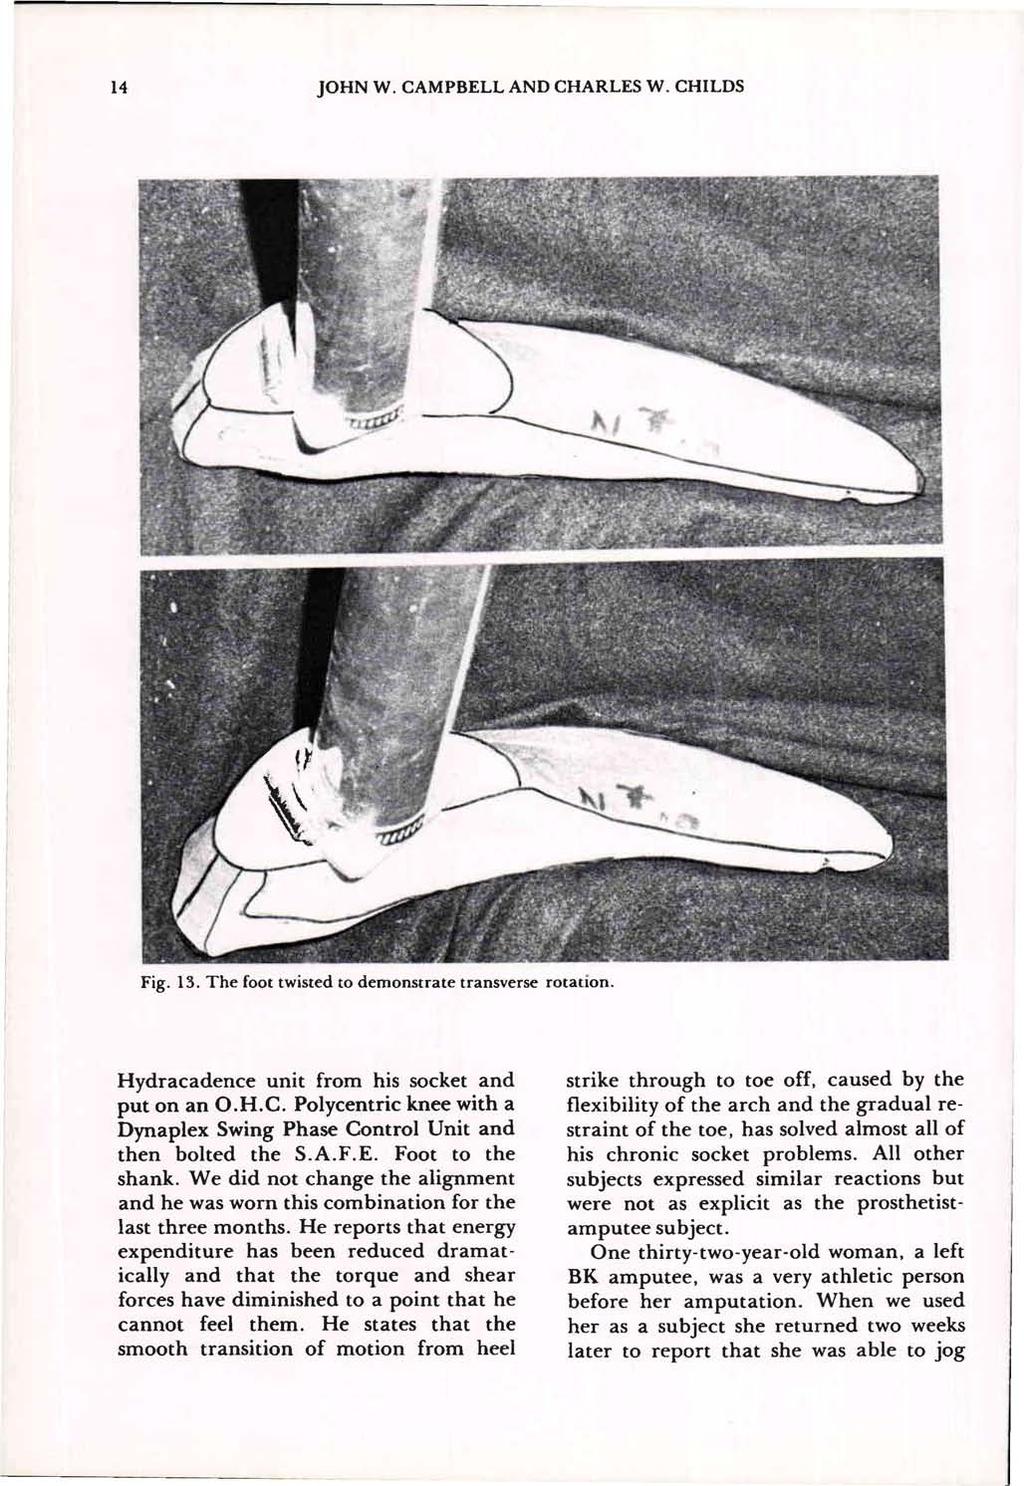 Fig. 13. The foot twisted to demonstrate transverse rotation. Hydracadence unit from his socket and put on an O.H.C. Polycentric knee with a Dynaplex Swing Phase Control Unit and then bolted the S.A.